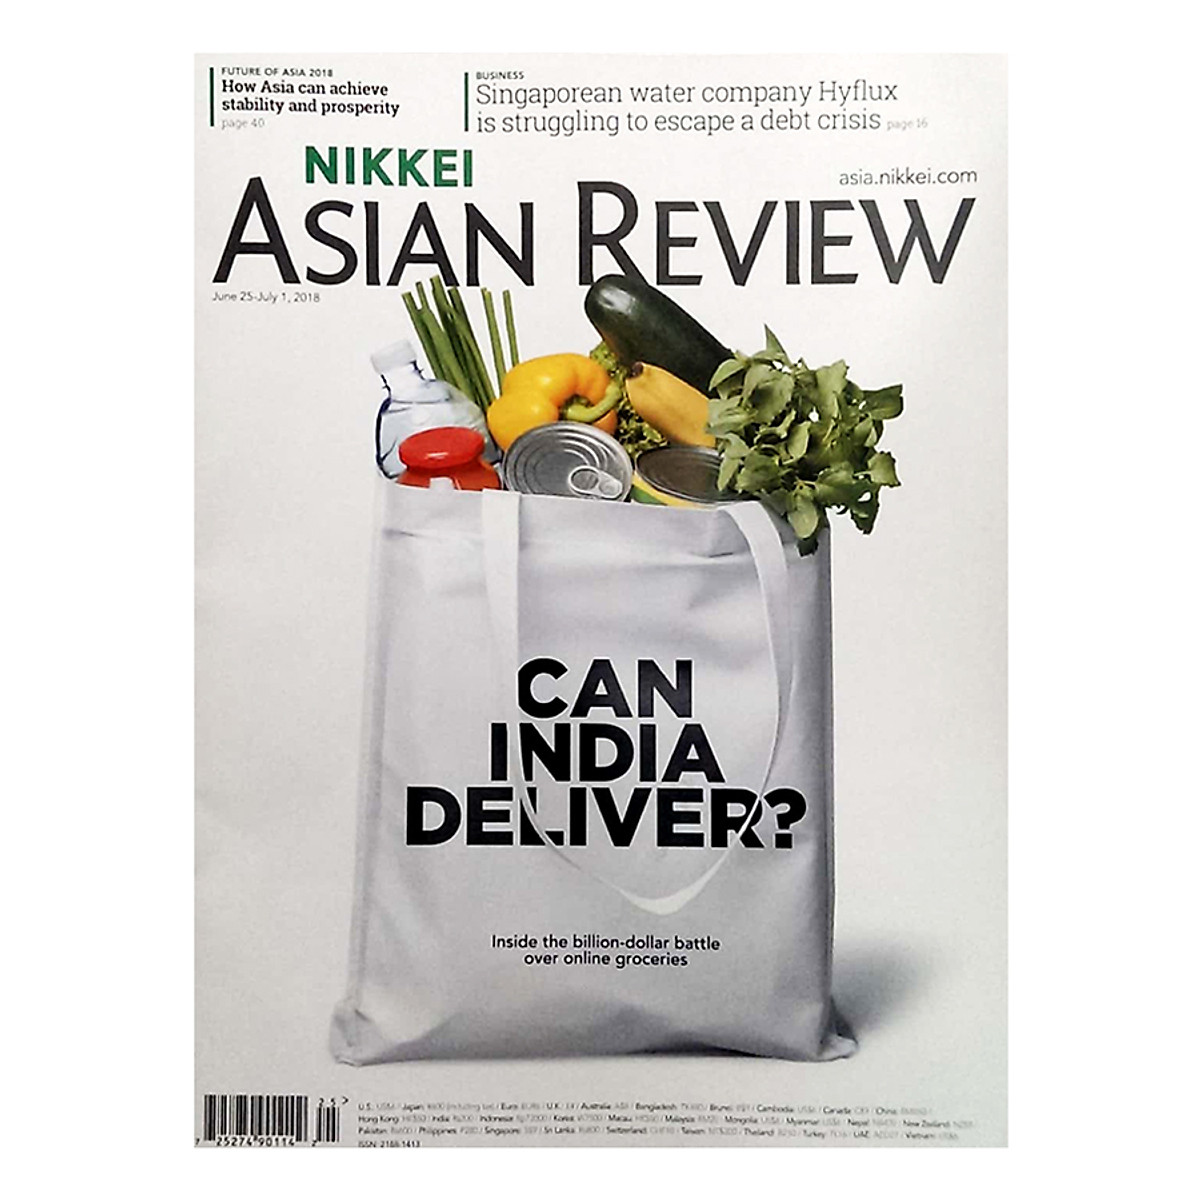 Nikkei Asian Review: CAN INDIA DELIVER? - 25